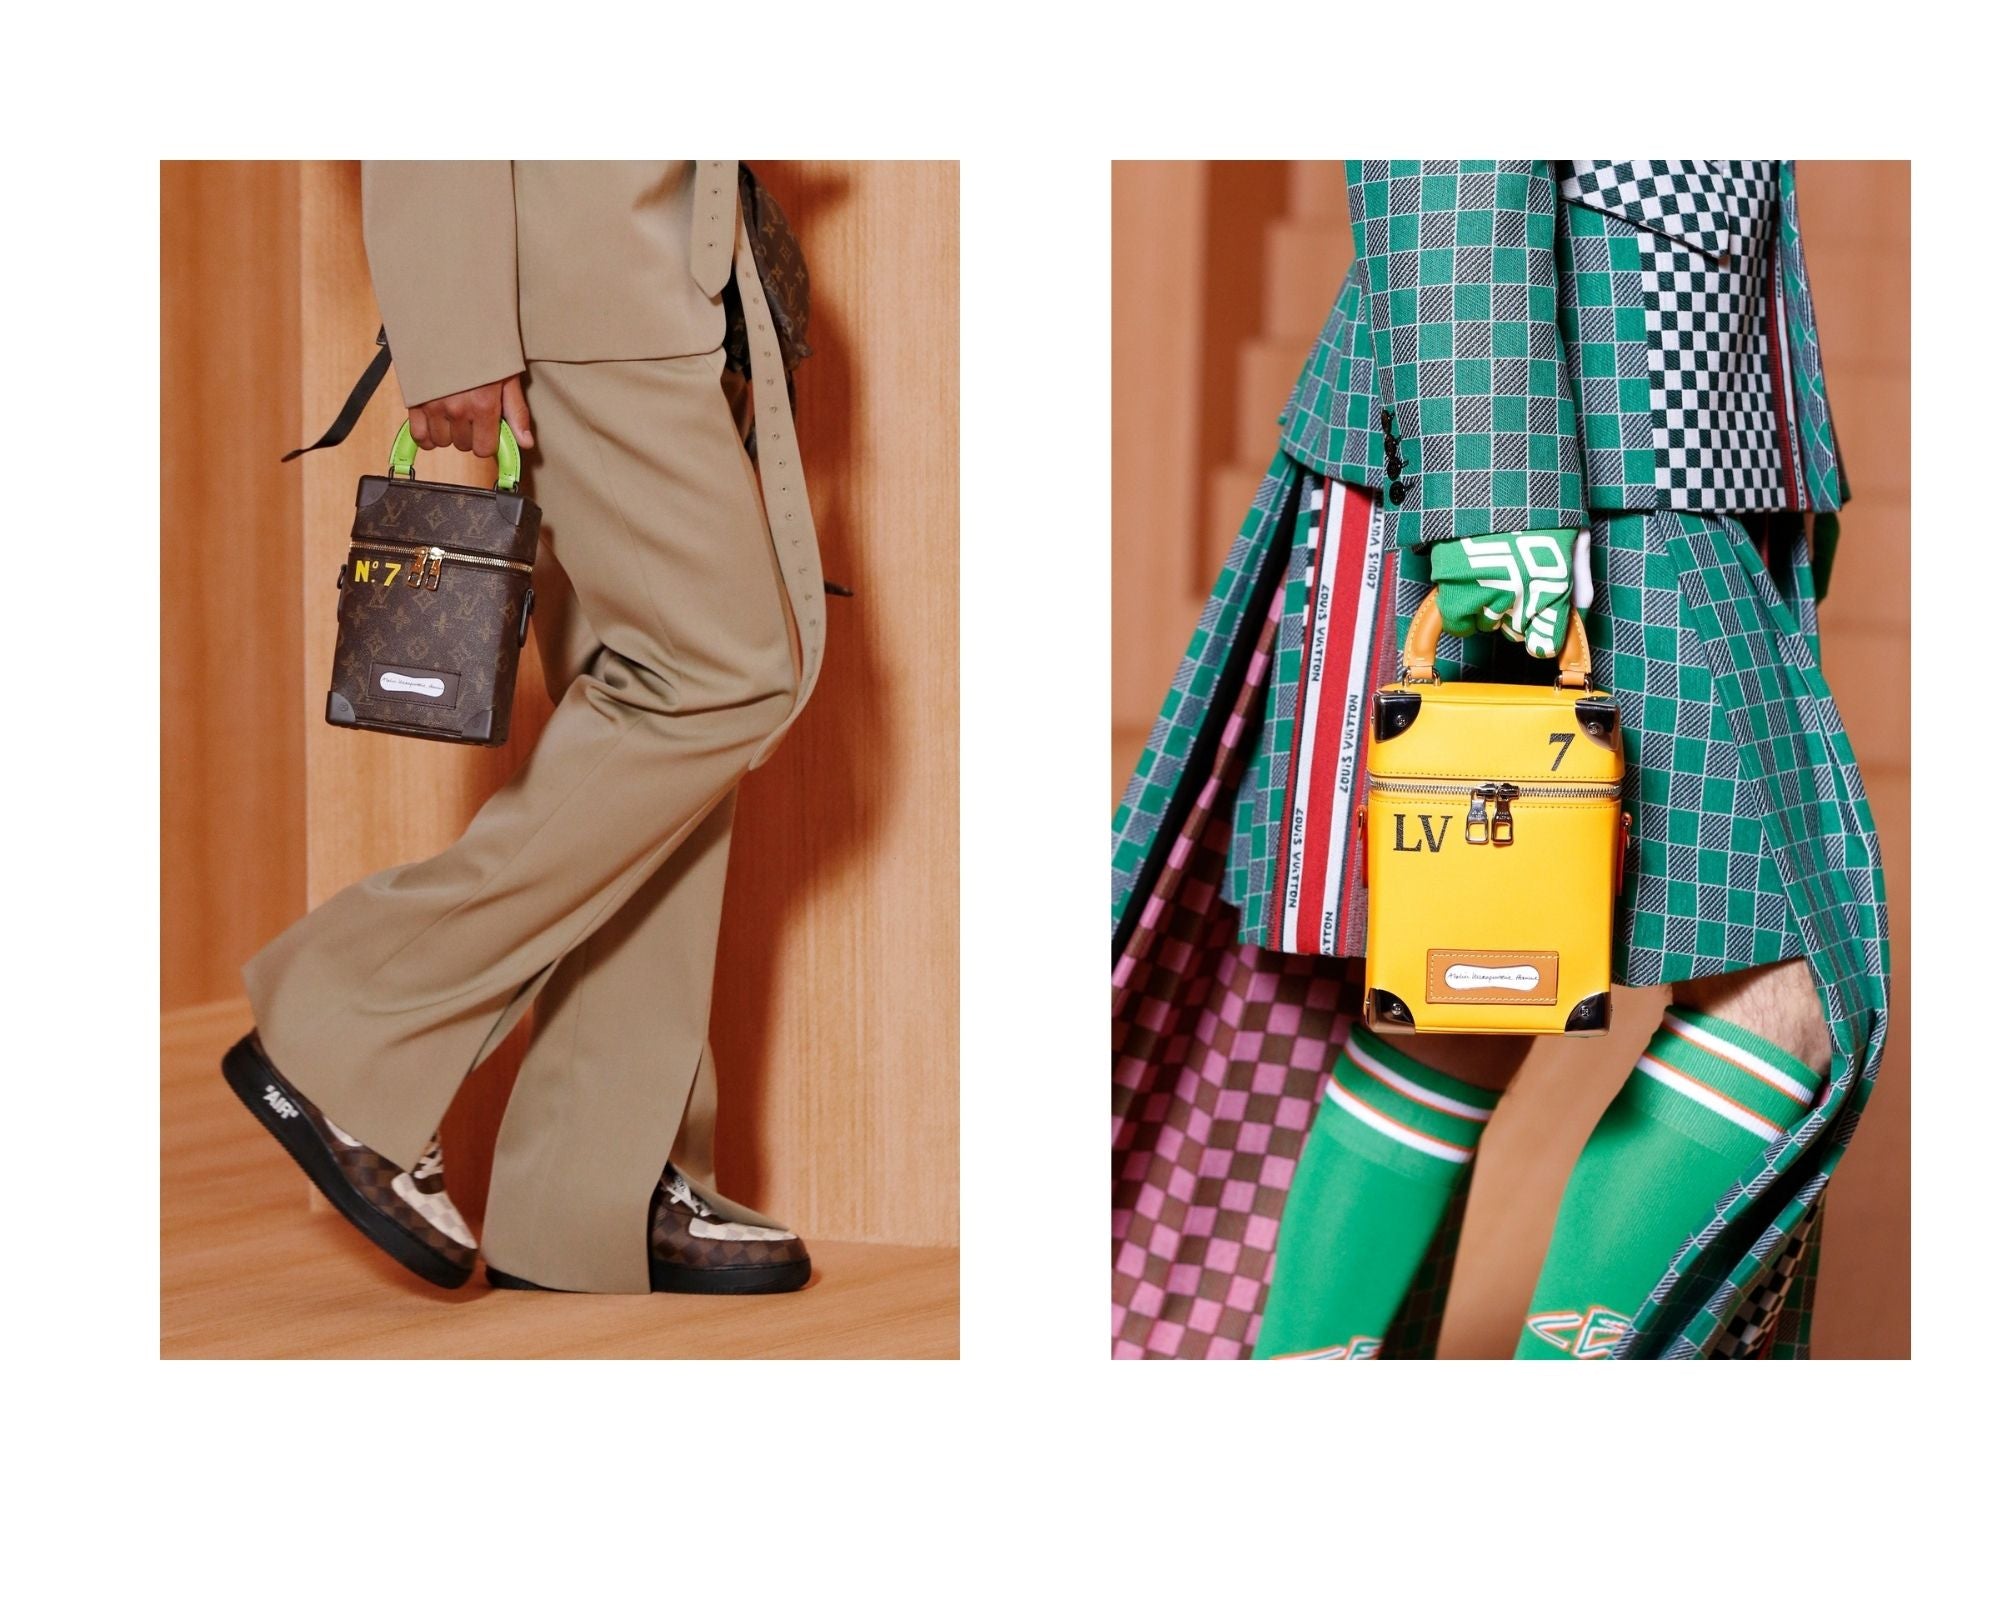 Louis Vuitton Men’s Spring Summer 2022 Collection: Bags, Trunks, Vanity Cases, Backpacks